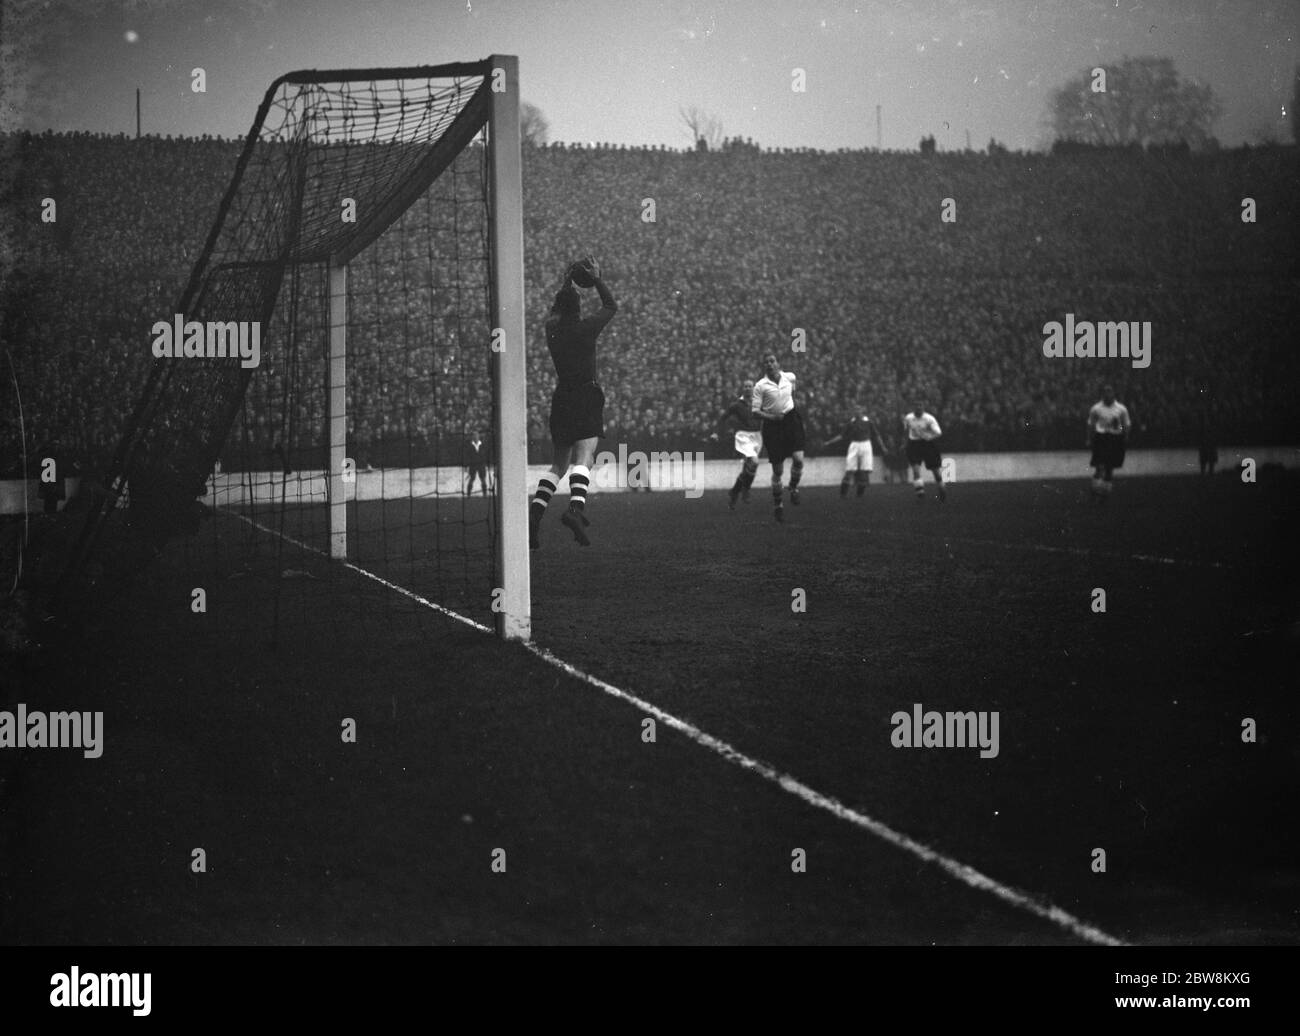 L P M versus Tooting in the FA Amateur Cup . One of the goal keepers takes an aerial . 27 November 1937 Stock Photo